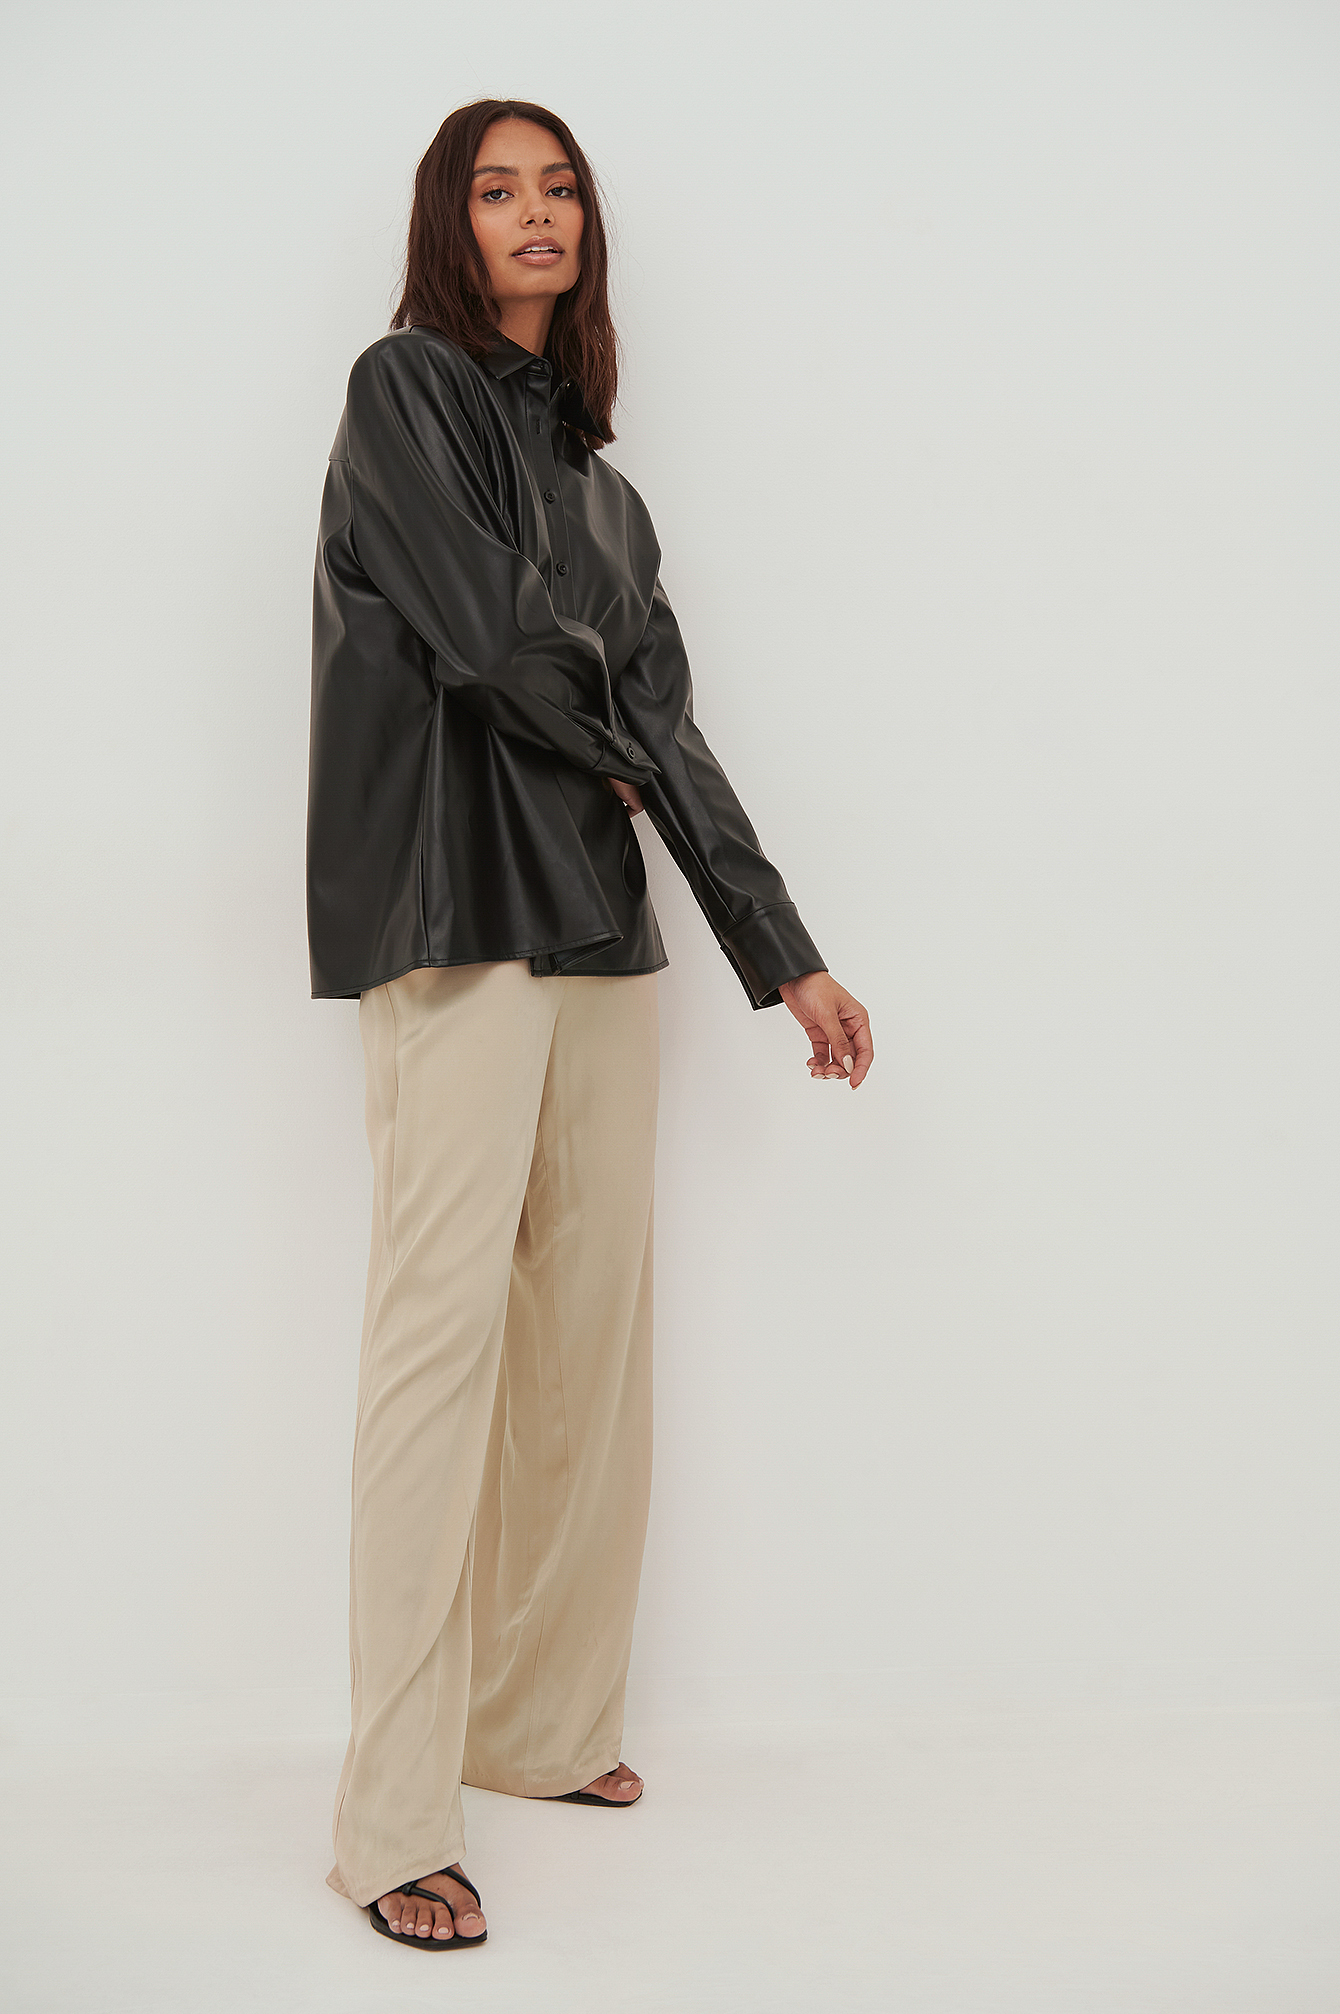 High Waist Flowy Satin Trousers Outfit.